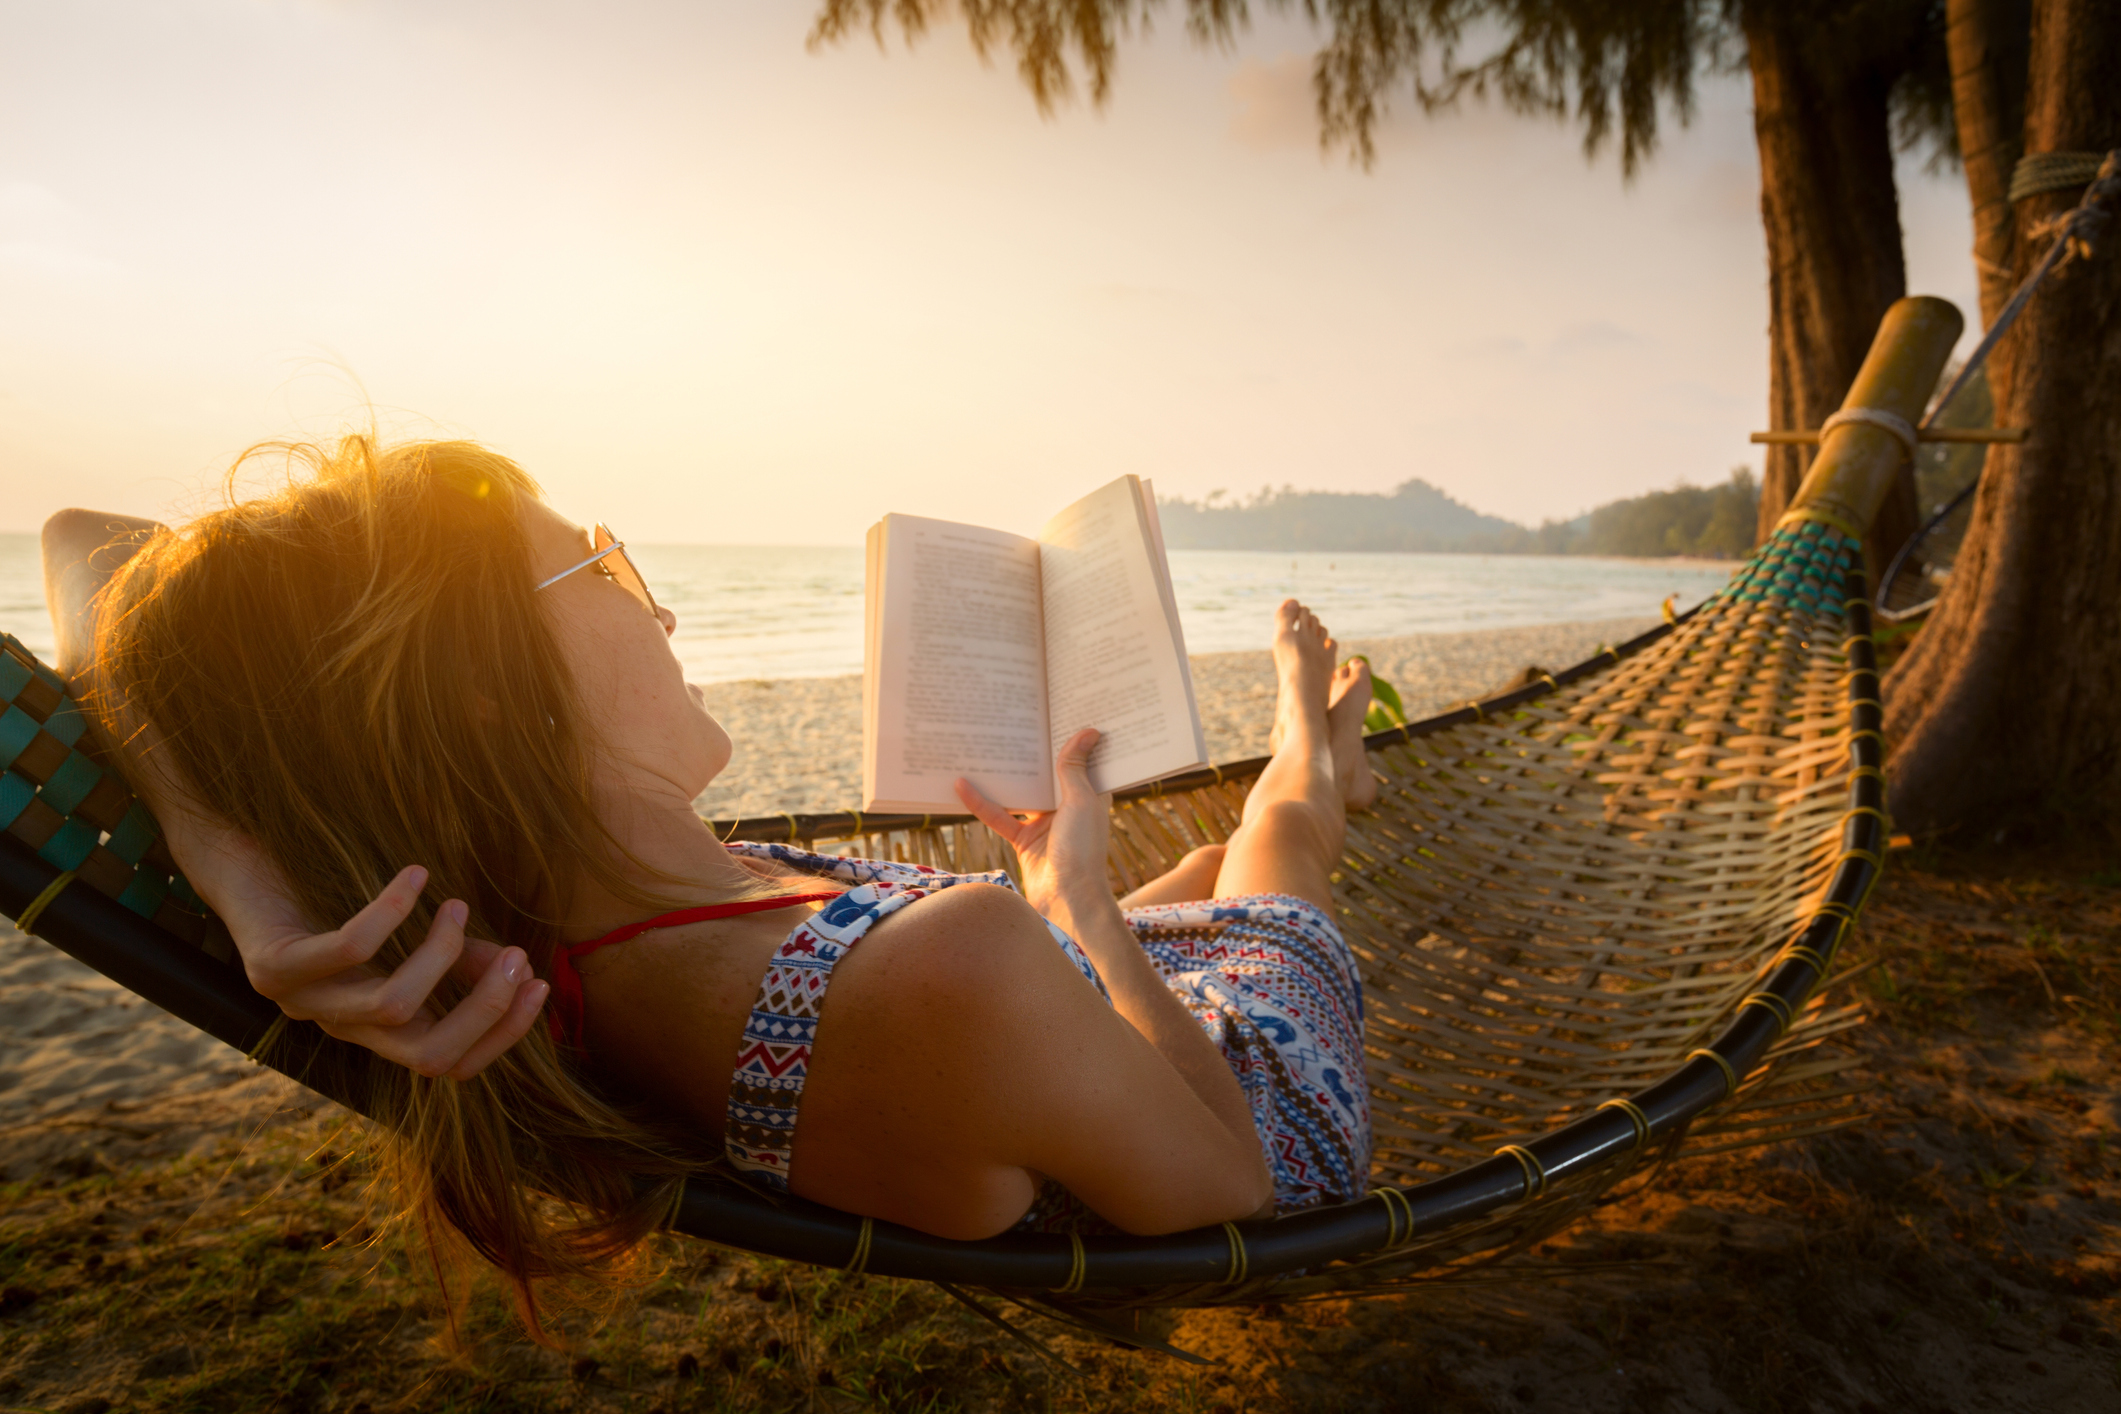 lady reading a book in hammock on a beach at sunset